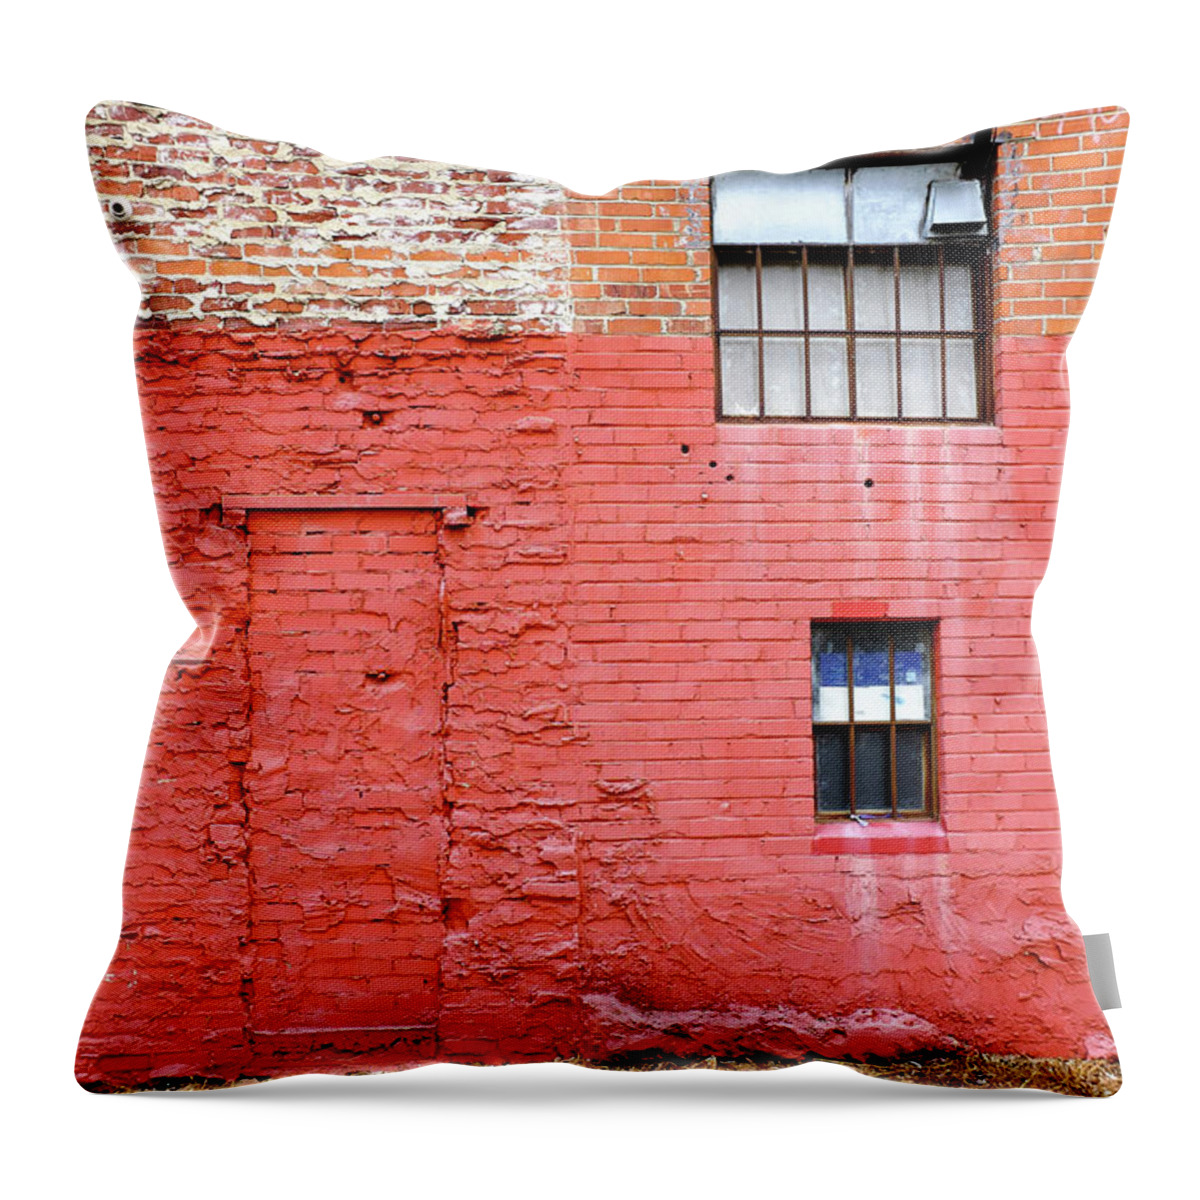 Old Red Brick Wall Throw Pillow featuring the photograph Red Brick Wall Downtown Hayward California by Kathy Anselmo